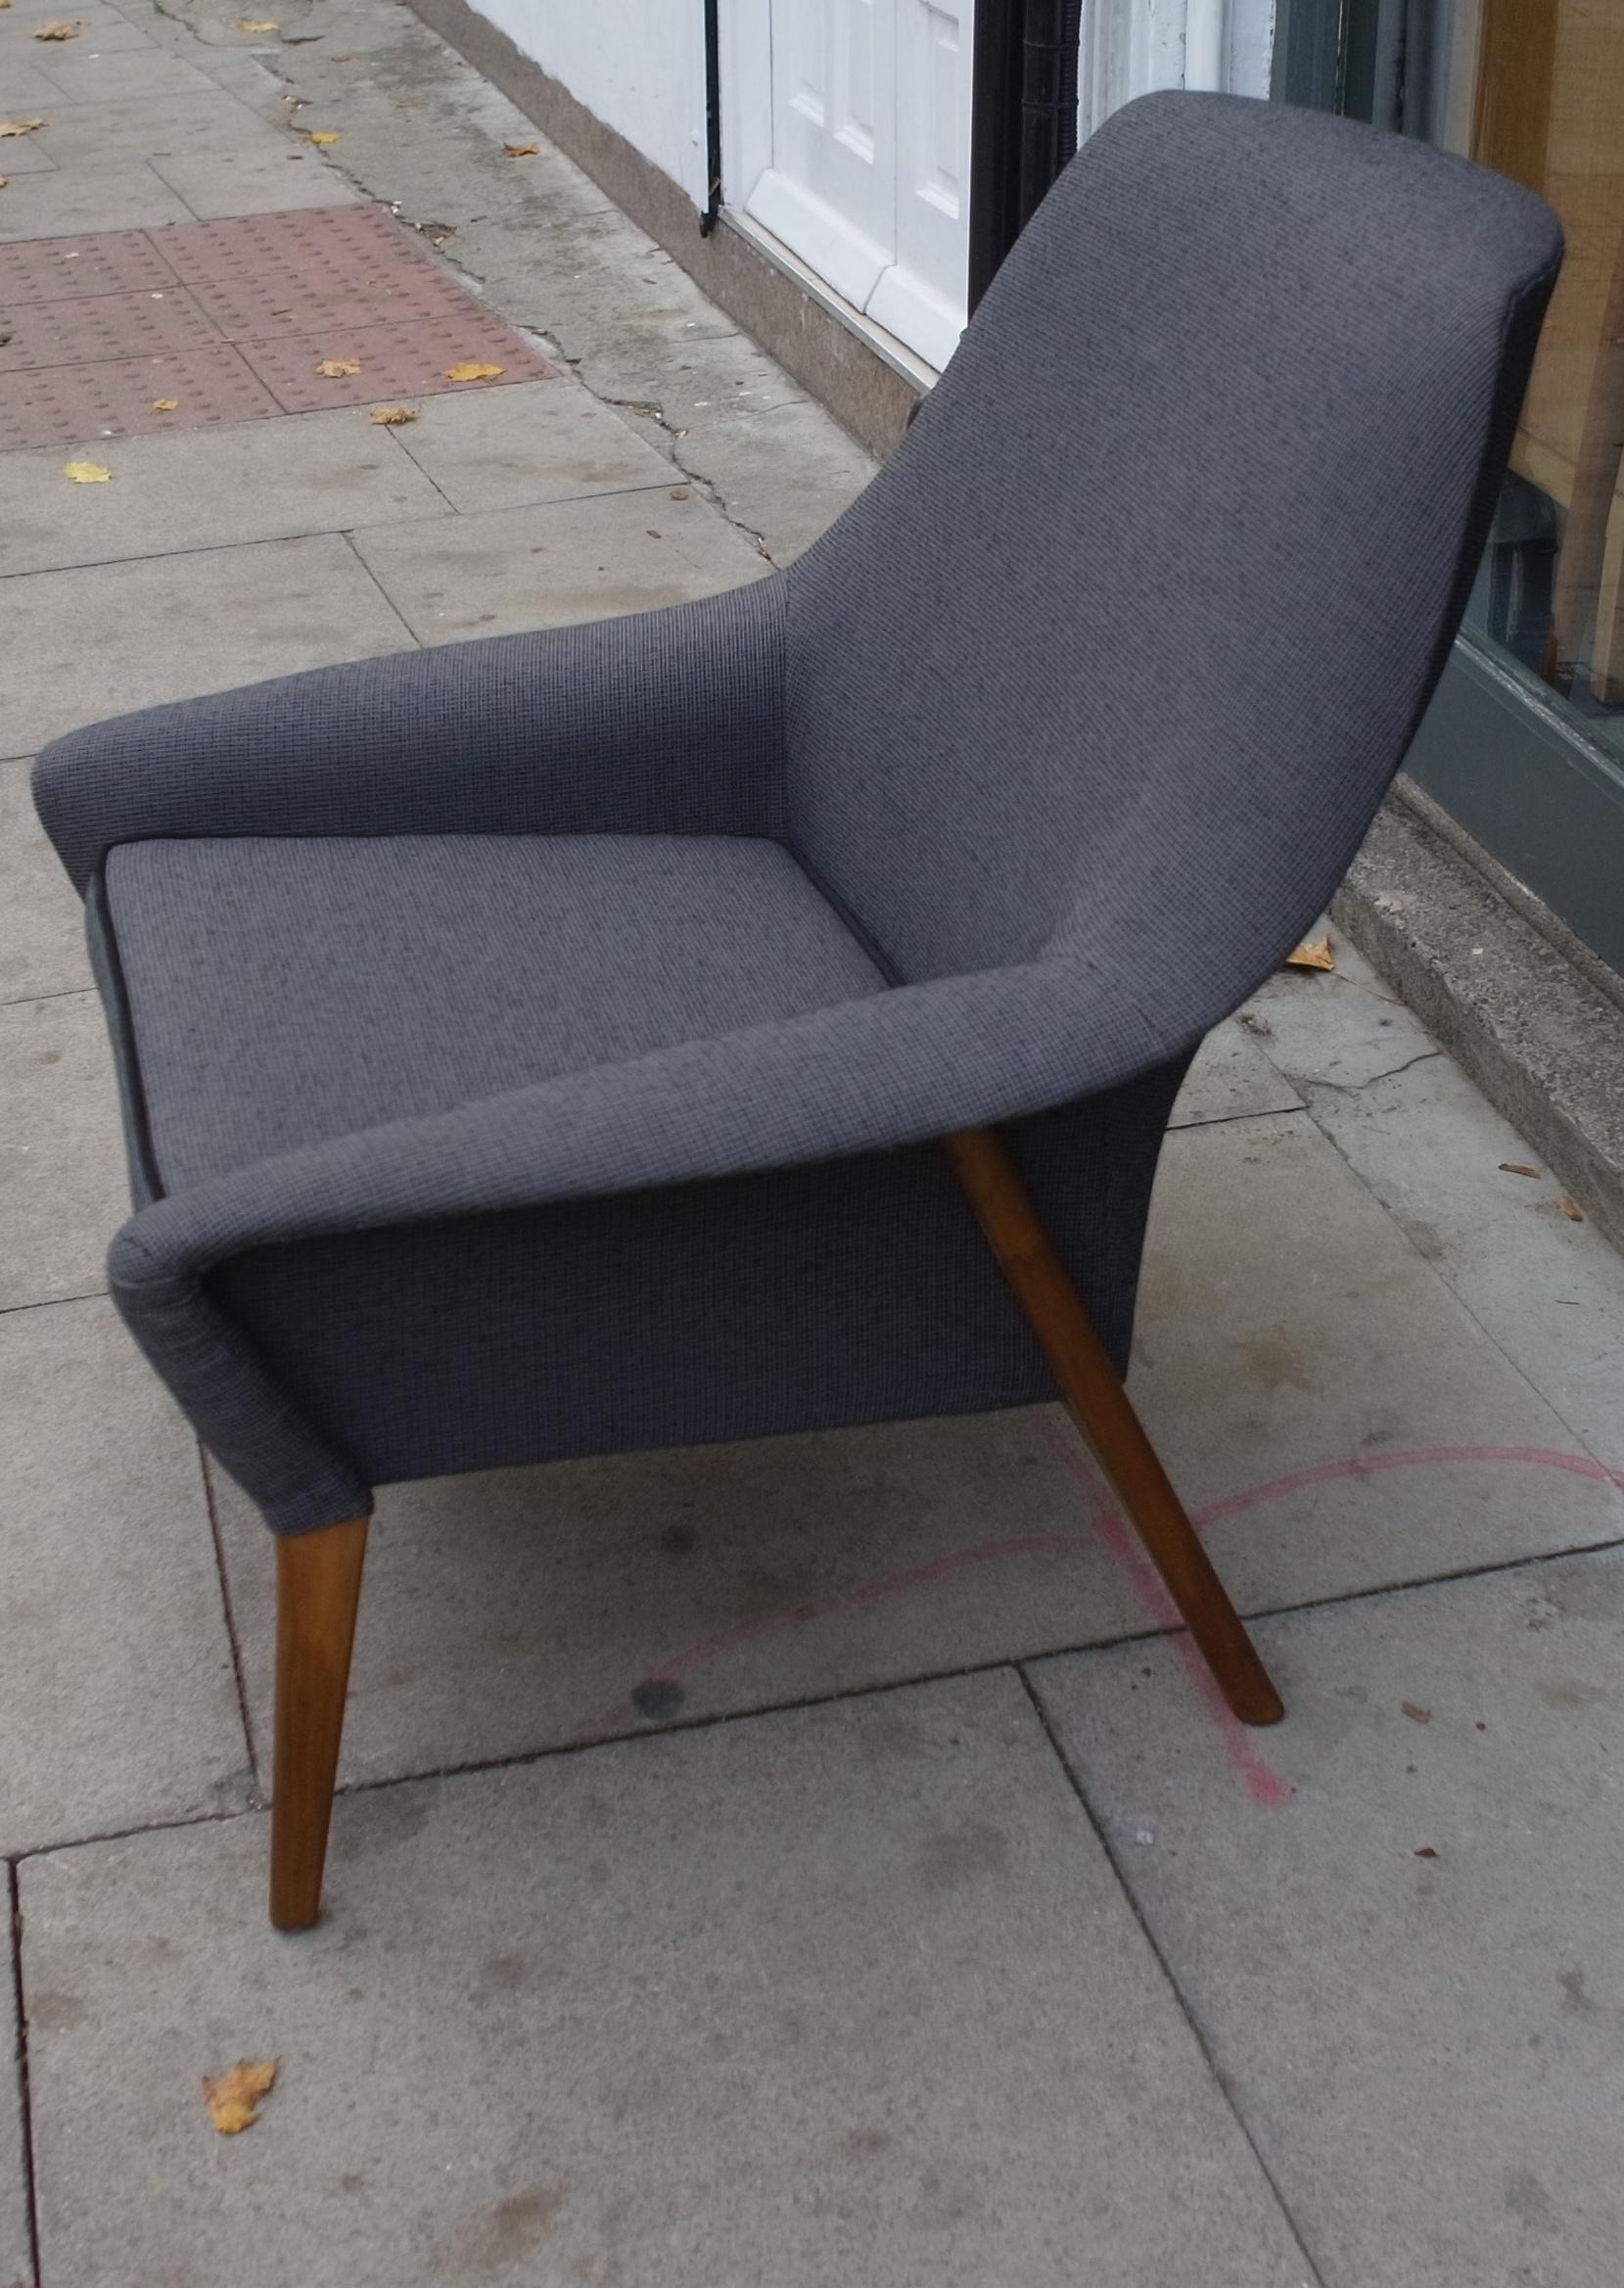 A very rare, comfortable and stylish vintage 1950s English 'Maldon' armchair, newly reupholstered in a grey and black 100% wool textile with black piping on the seat cushion, on an external Walnut framed base. This armchair is in excellent vintage